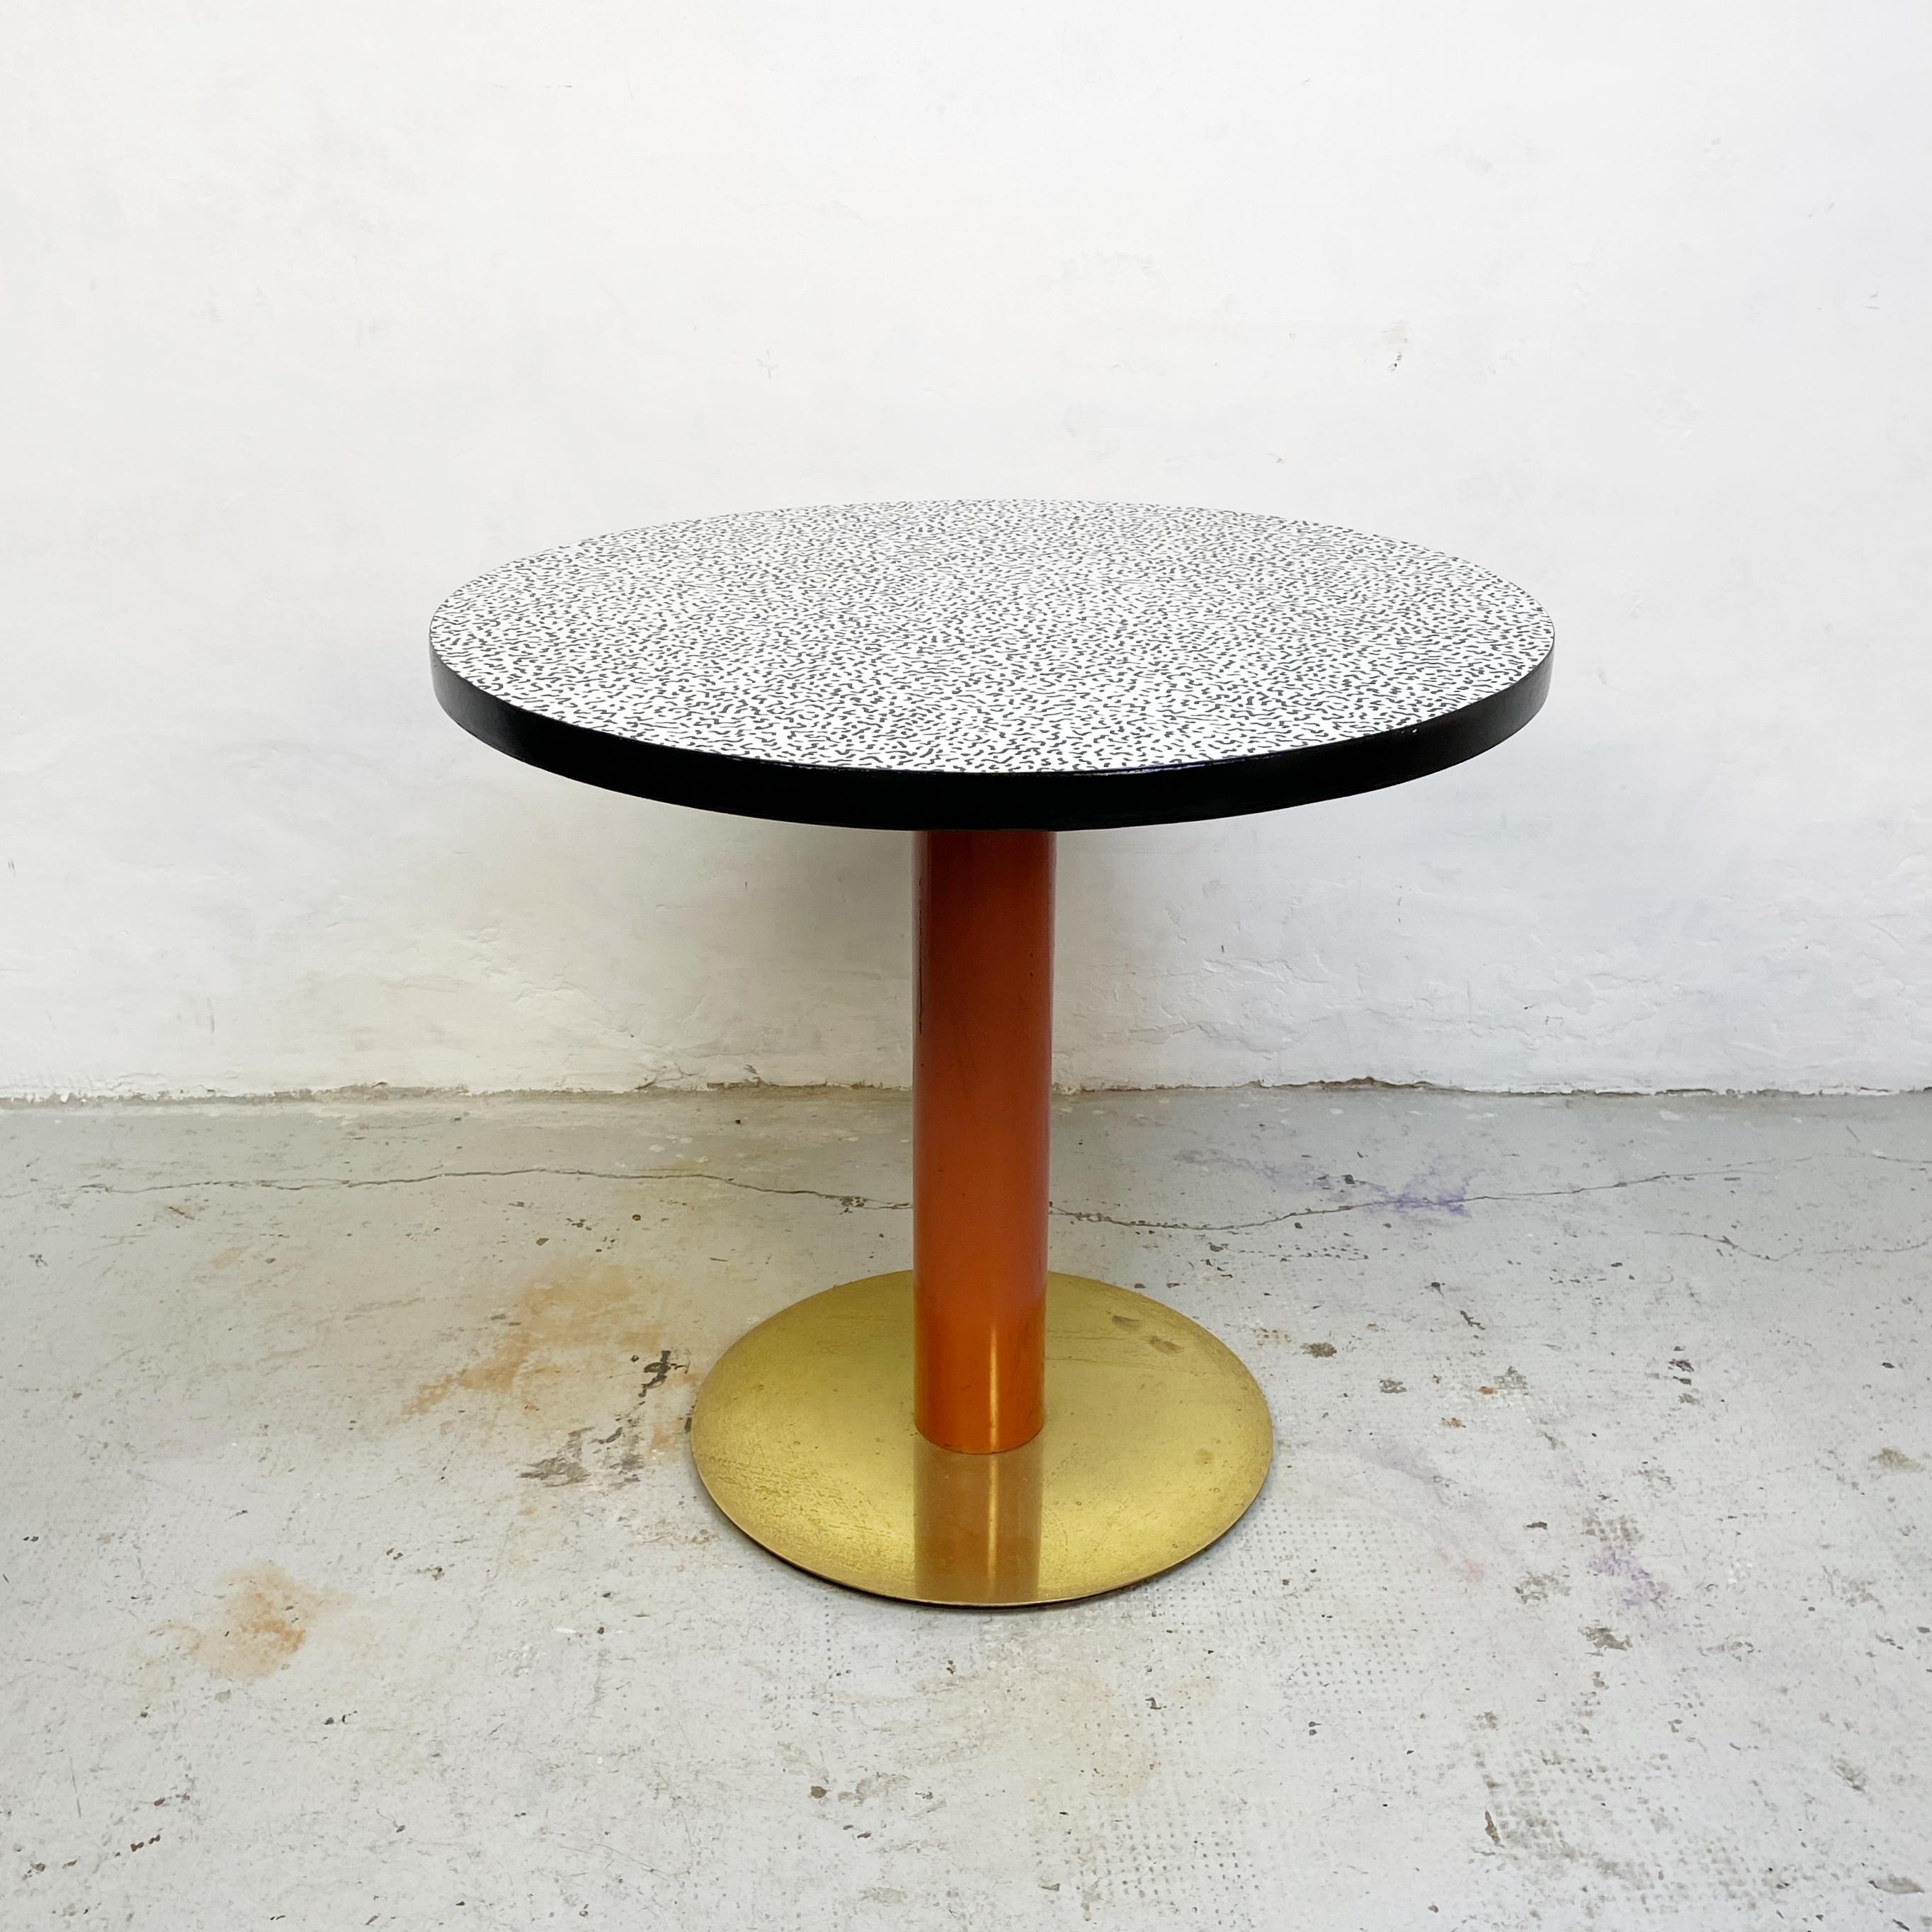 Late 20th Century Italian Mid-Century Modern Round Table with Decorative Pattern, 1980s